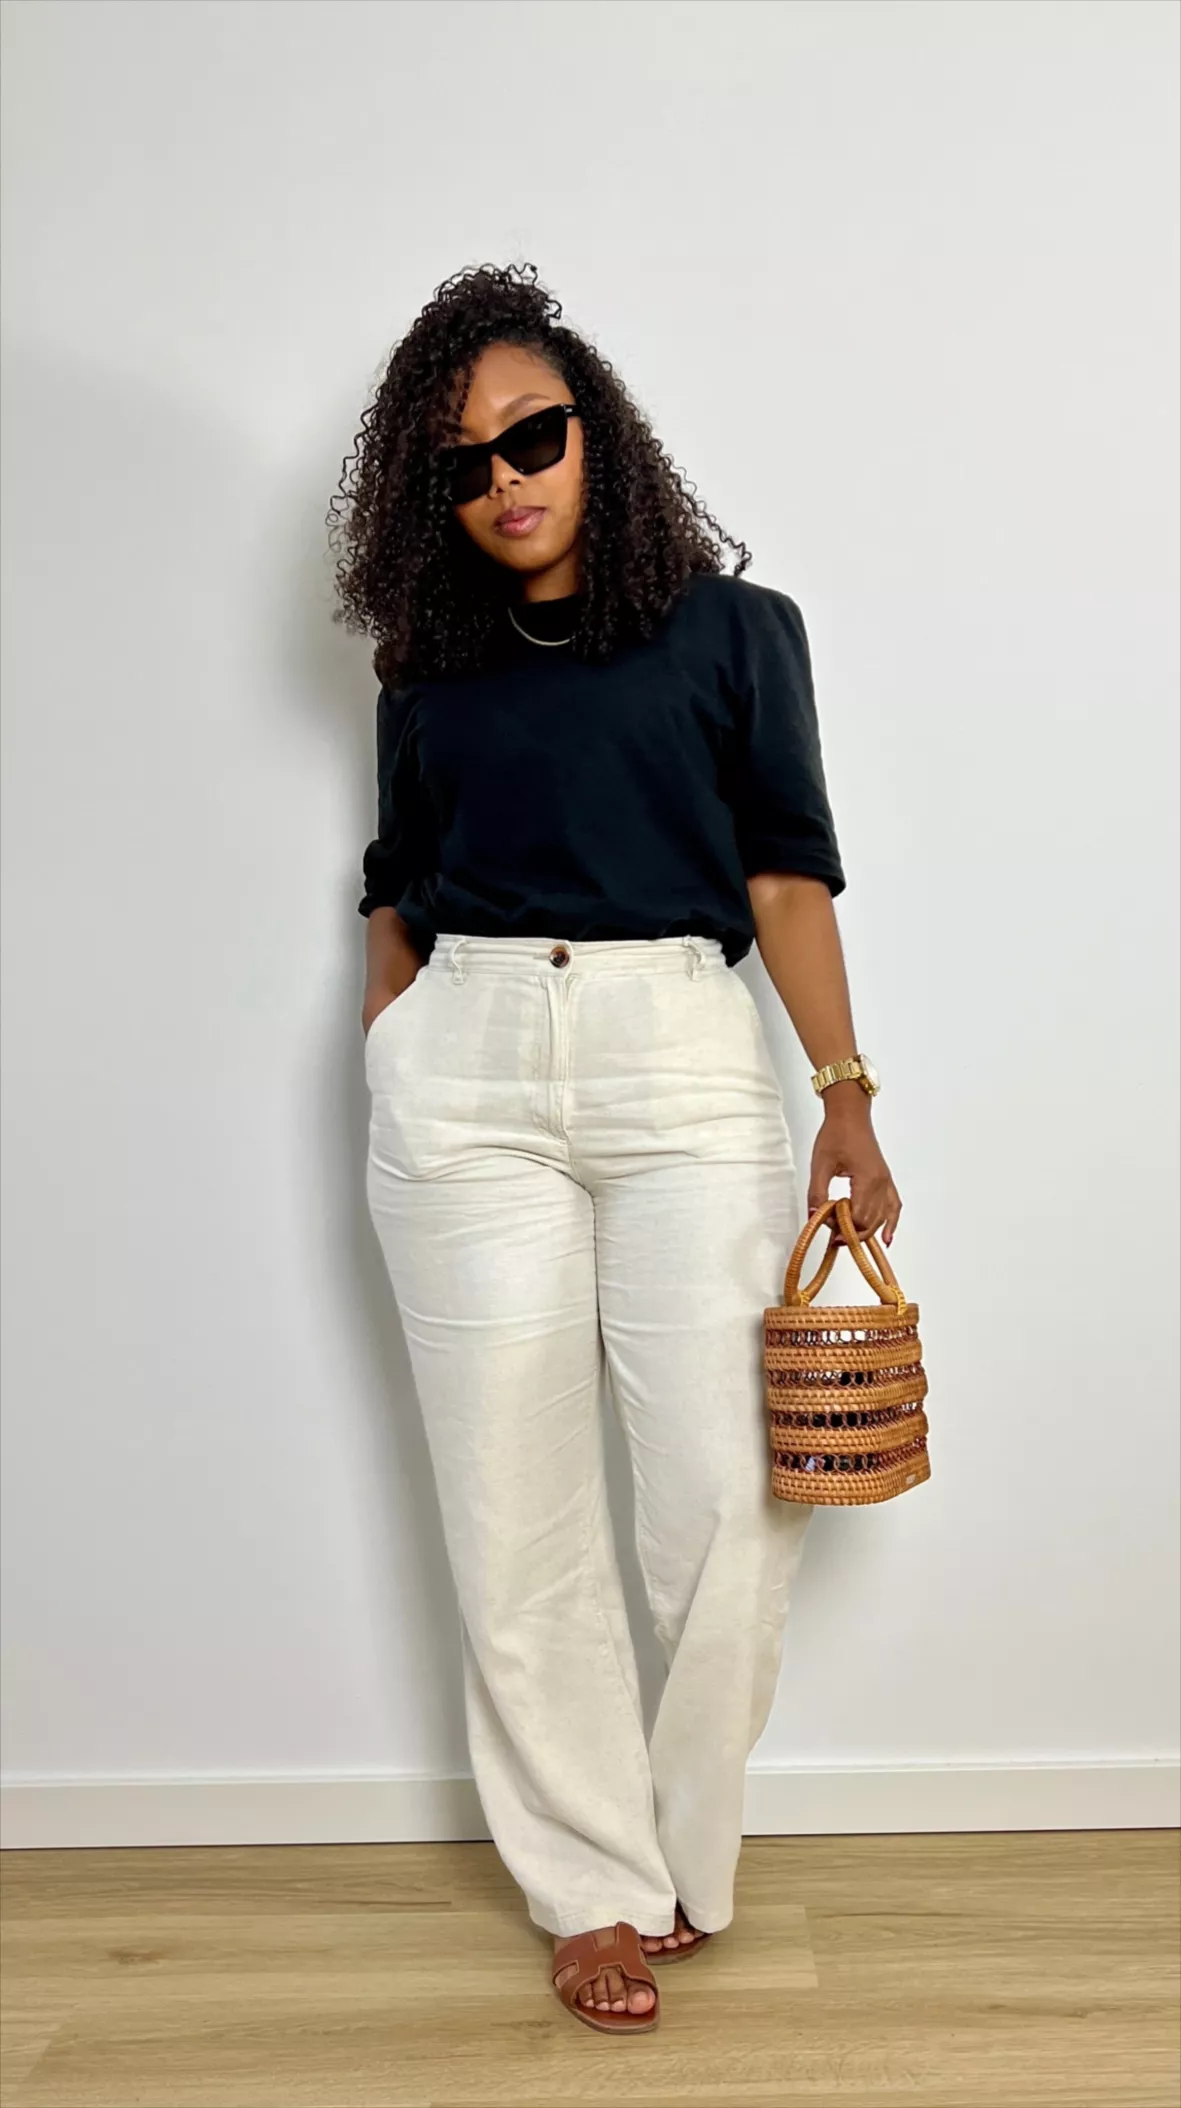 Casual but Stylish Ways to Wear Linen Pants This Summer